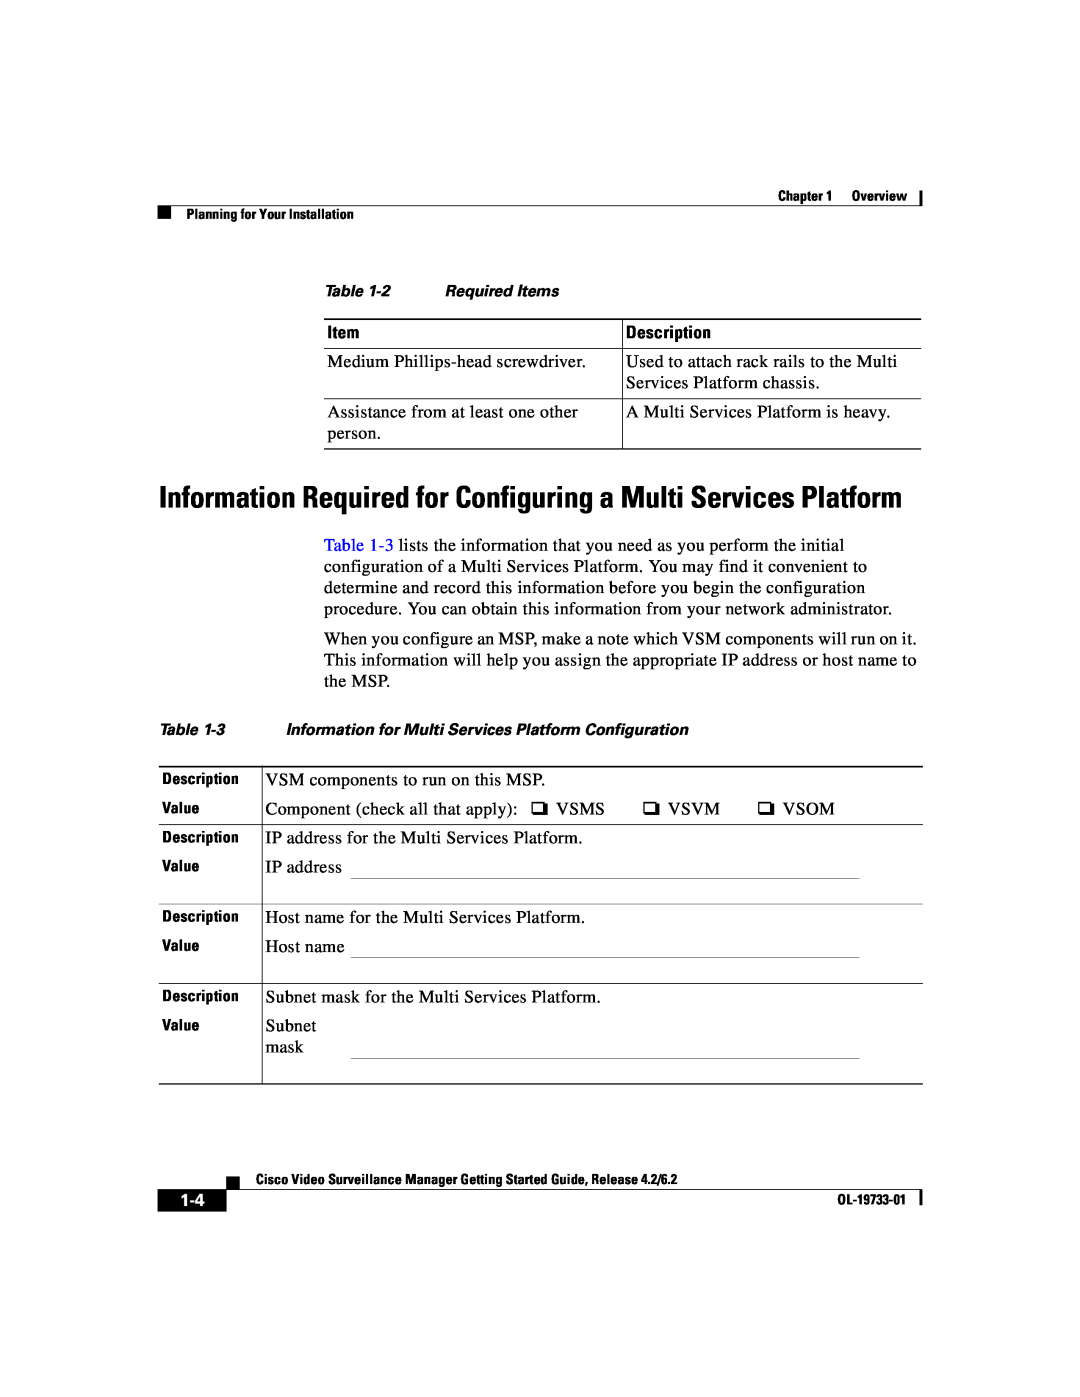 Cisco Systems Release 4.2 manual Information Required for Configuring a Multi Services Platform, Description 